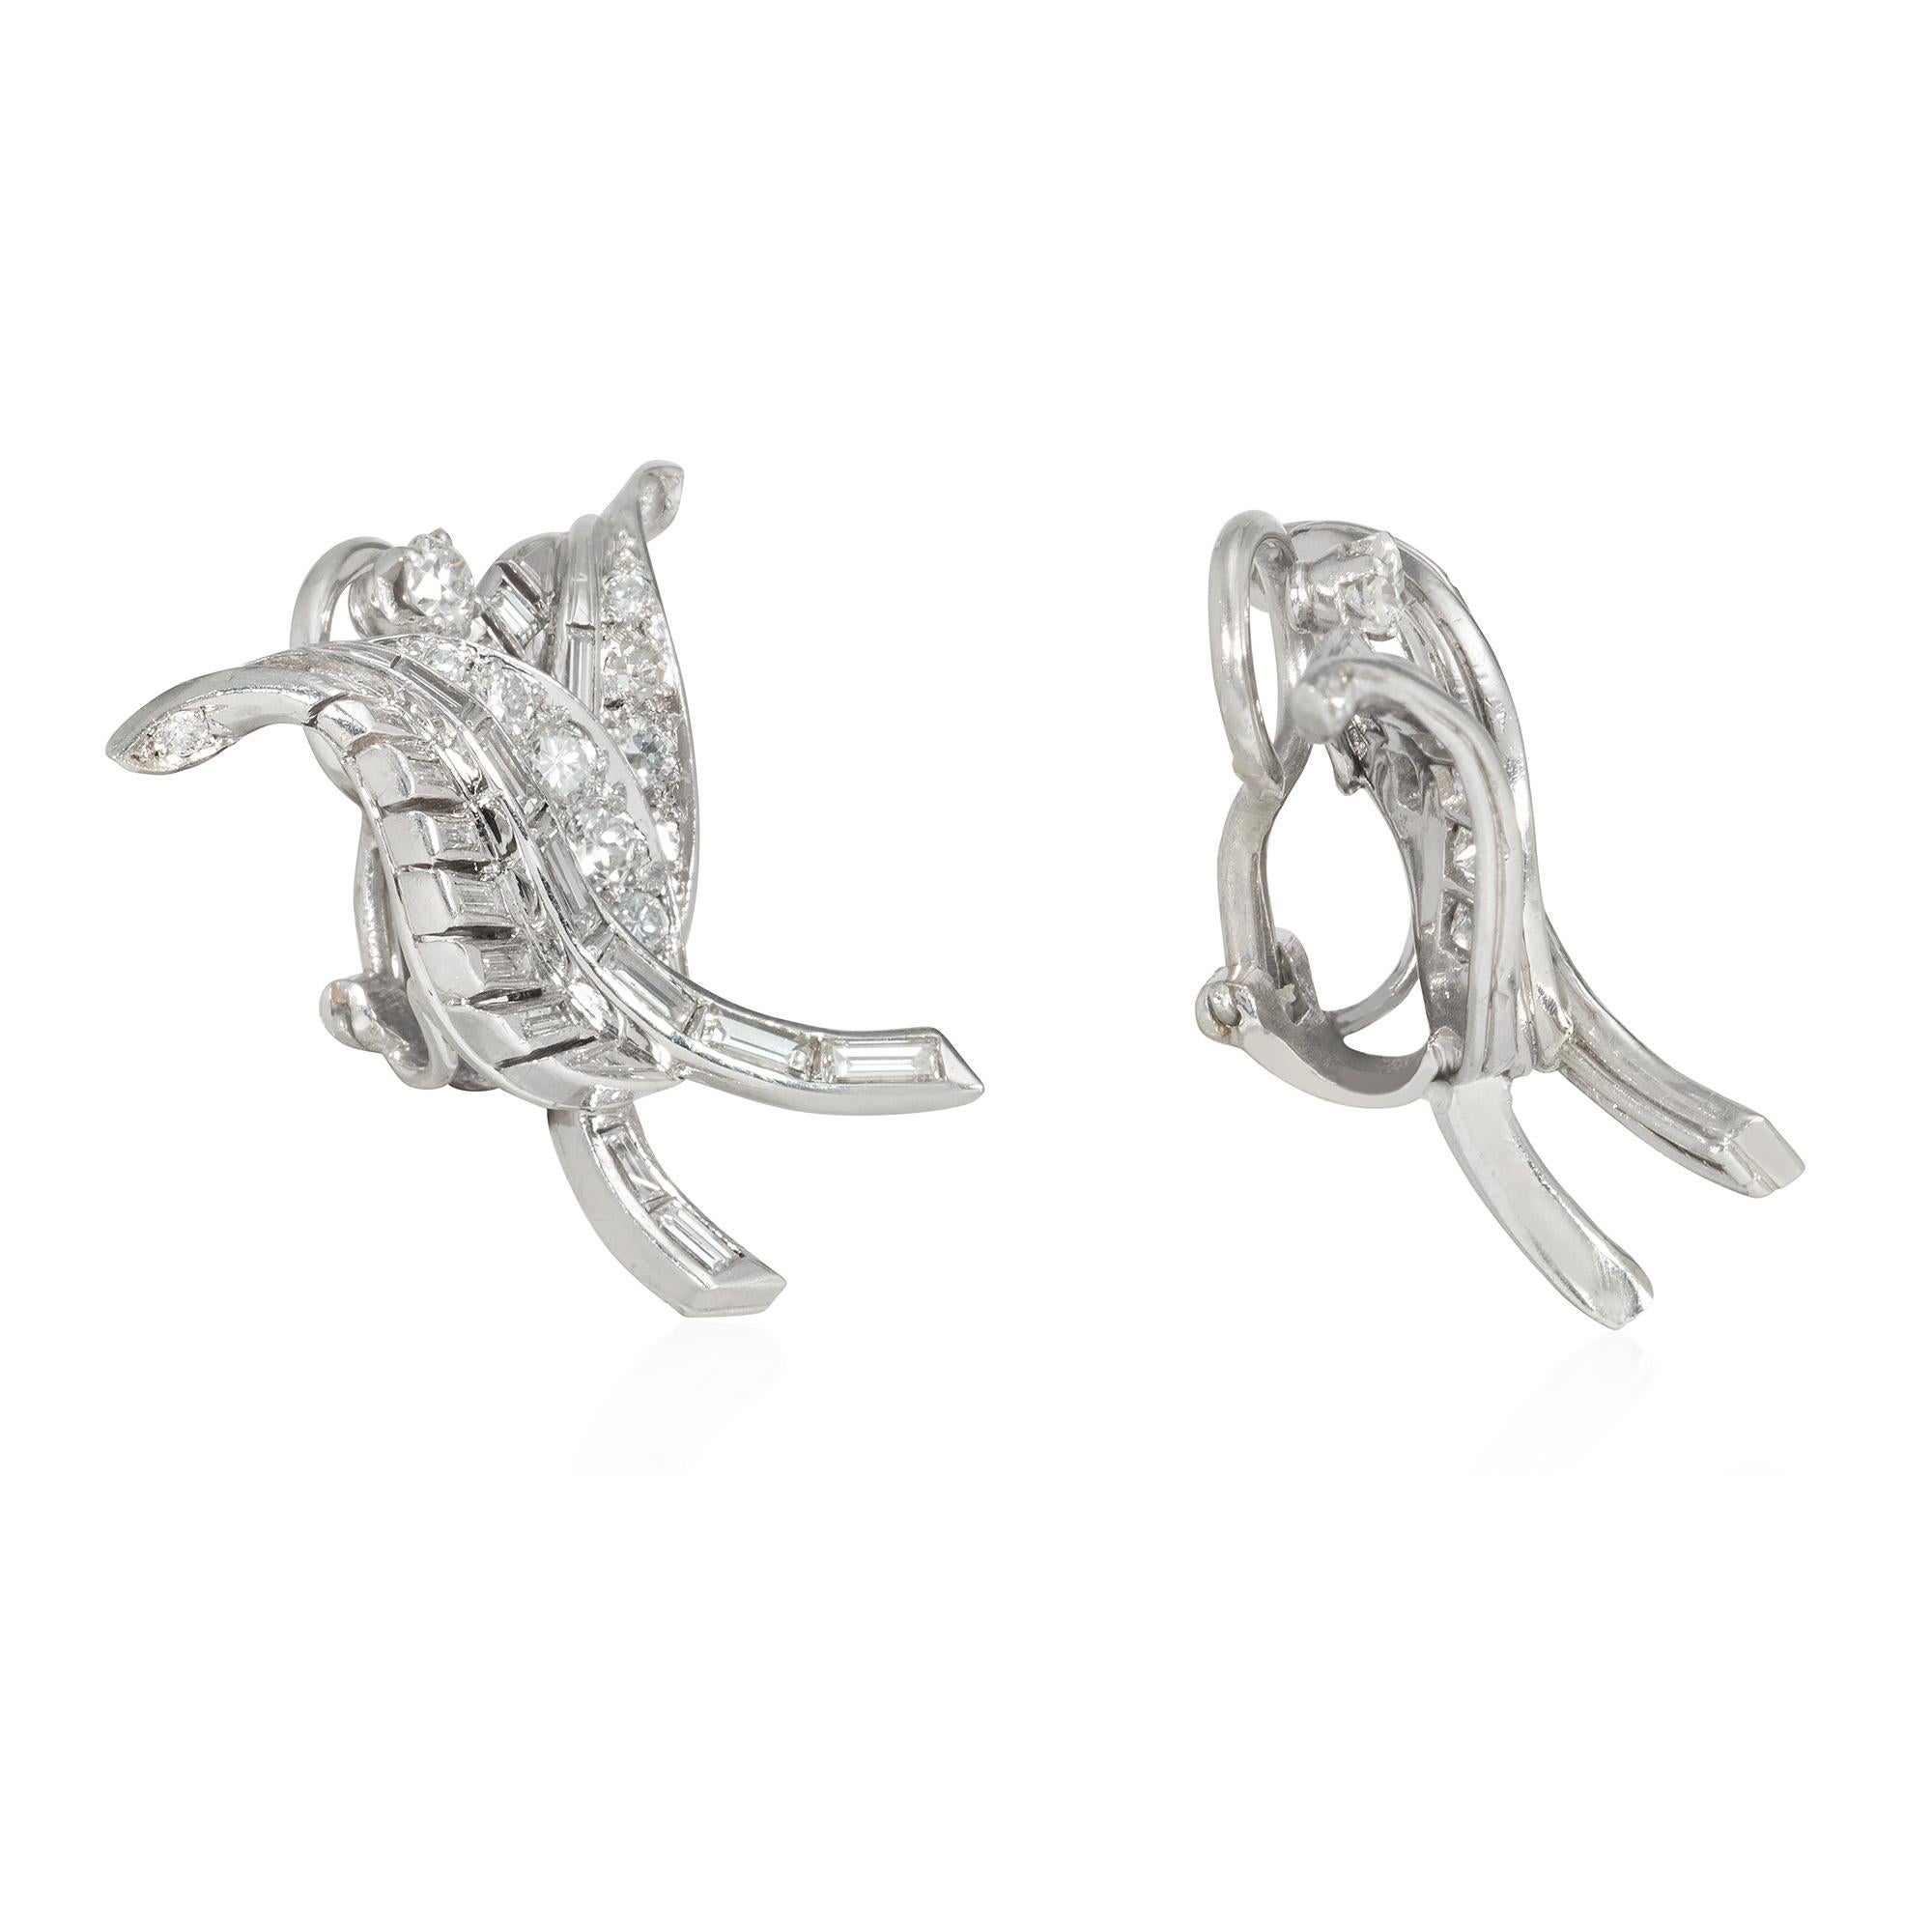 A pair of mid-century diamond clip earrings designed as overlapping leaves with curled tips, each leaf blade consisting of round brilliant-cut and baguette-cut diamonds separated by a petiole of graduated baguette-cut diamonds, and surmounted by a